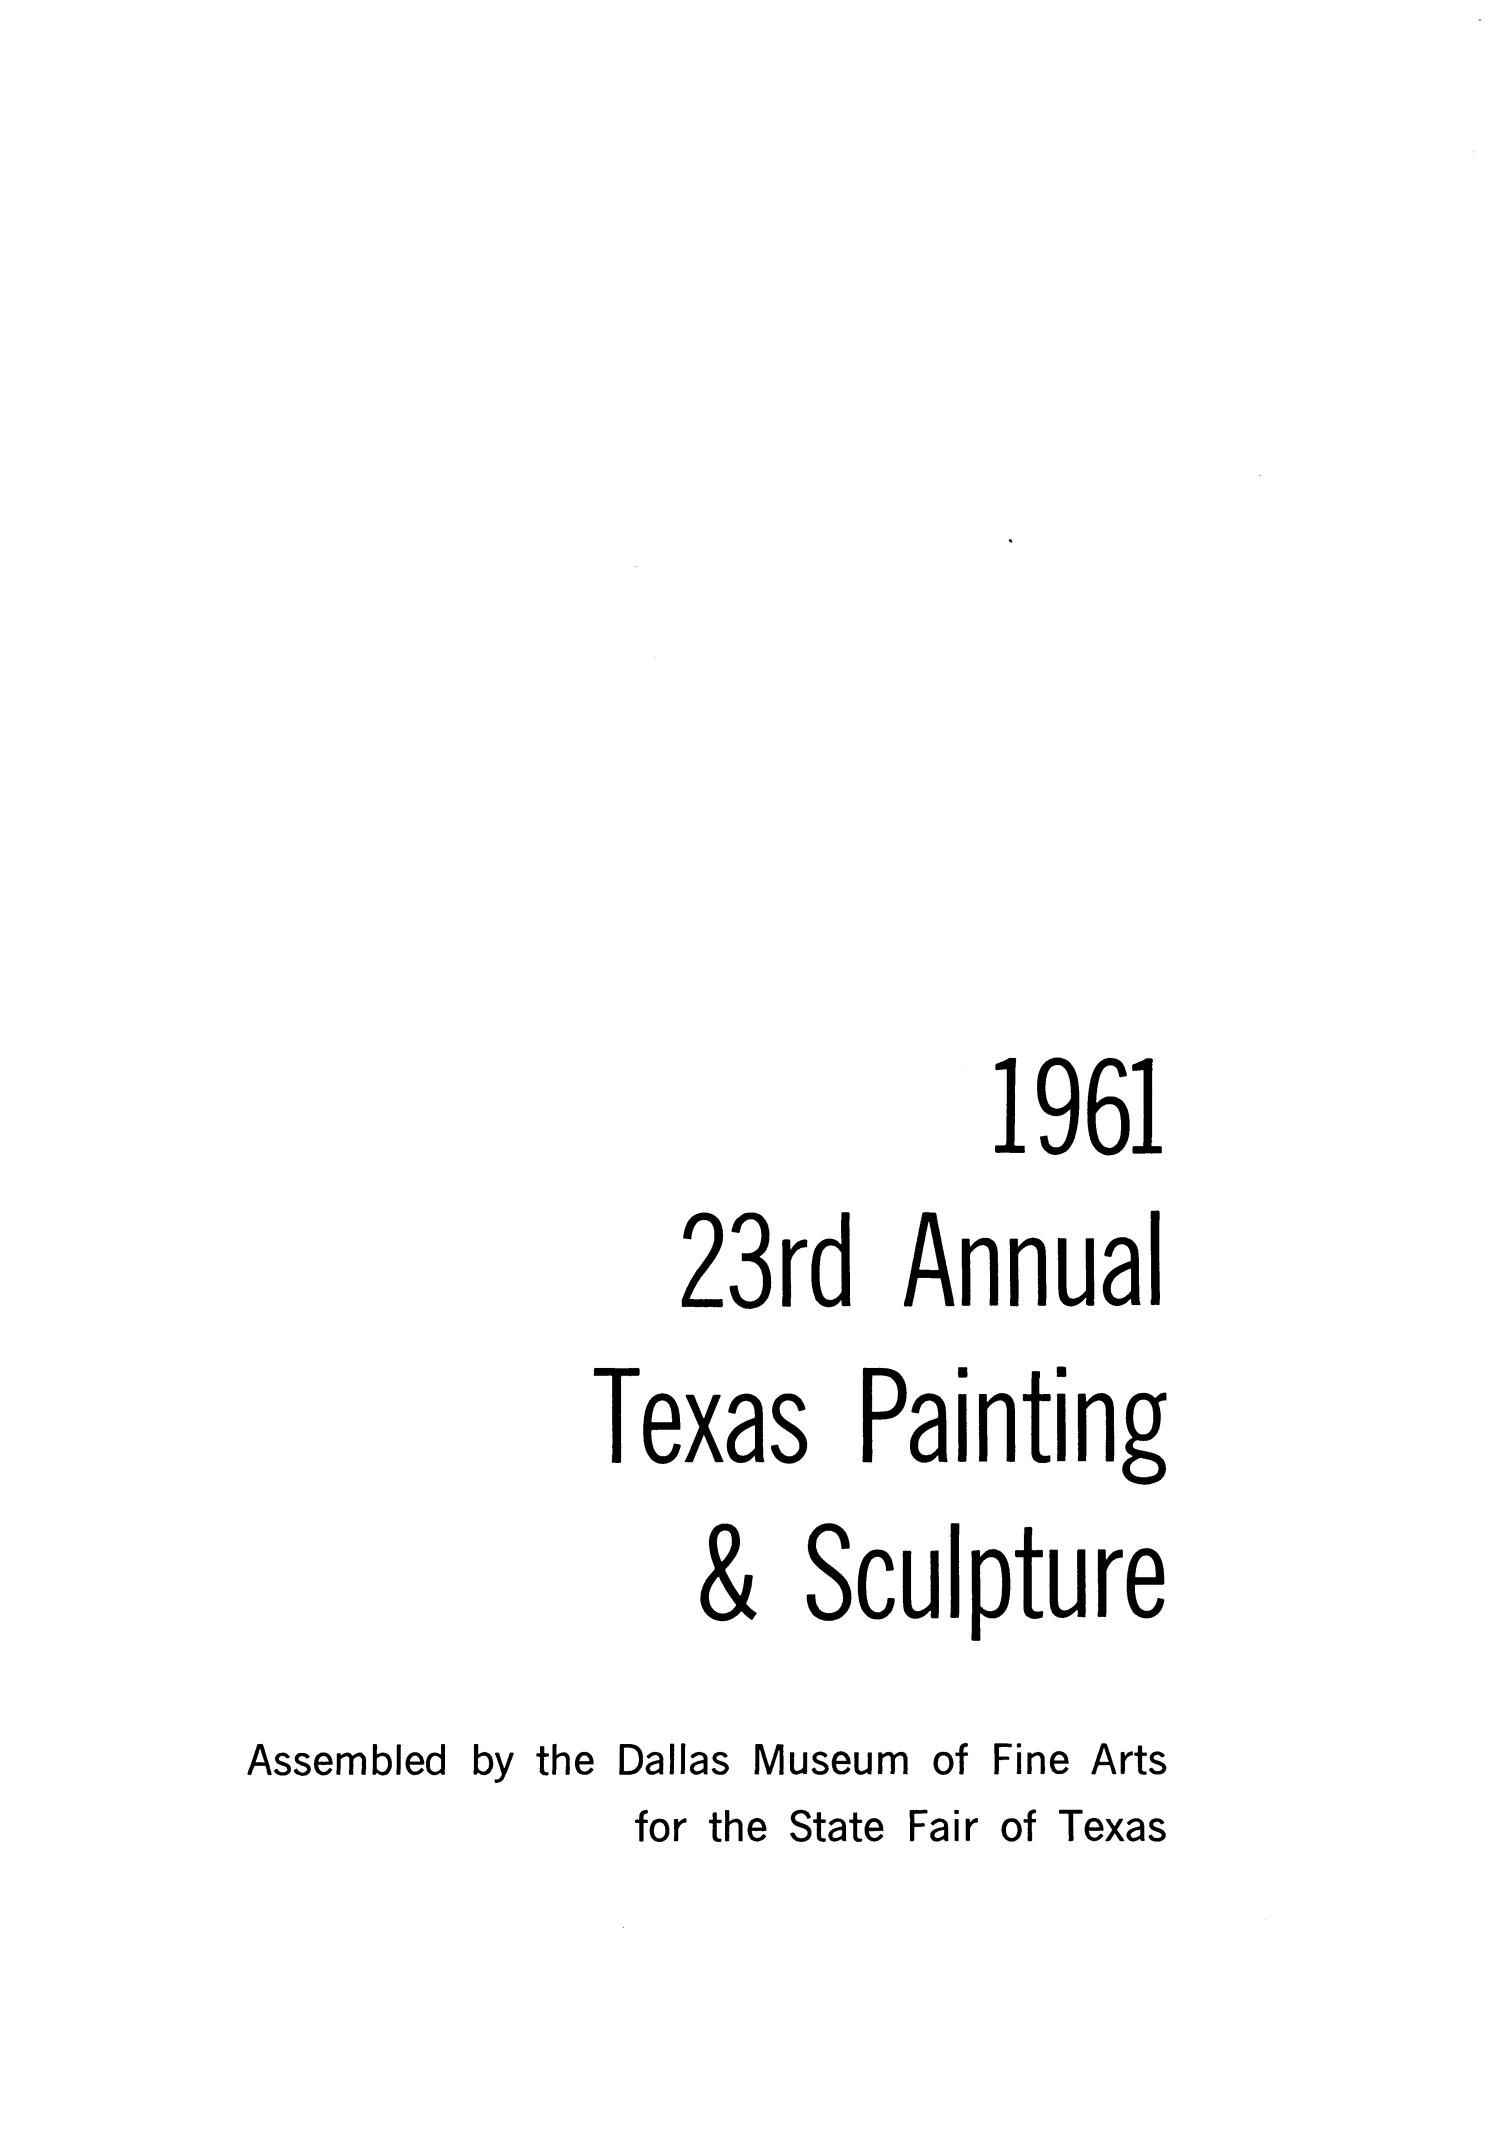 23rd Annual Painting & Sculpture, 1961
                                                
                                                    3
                                                